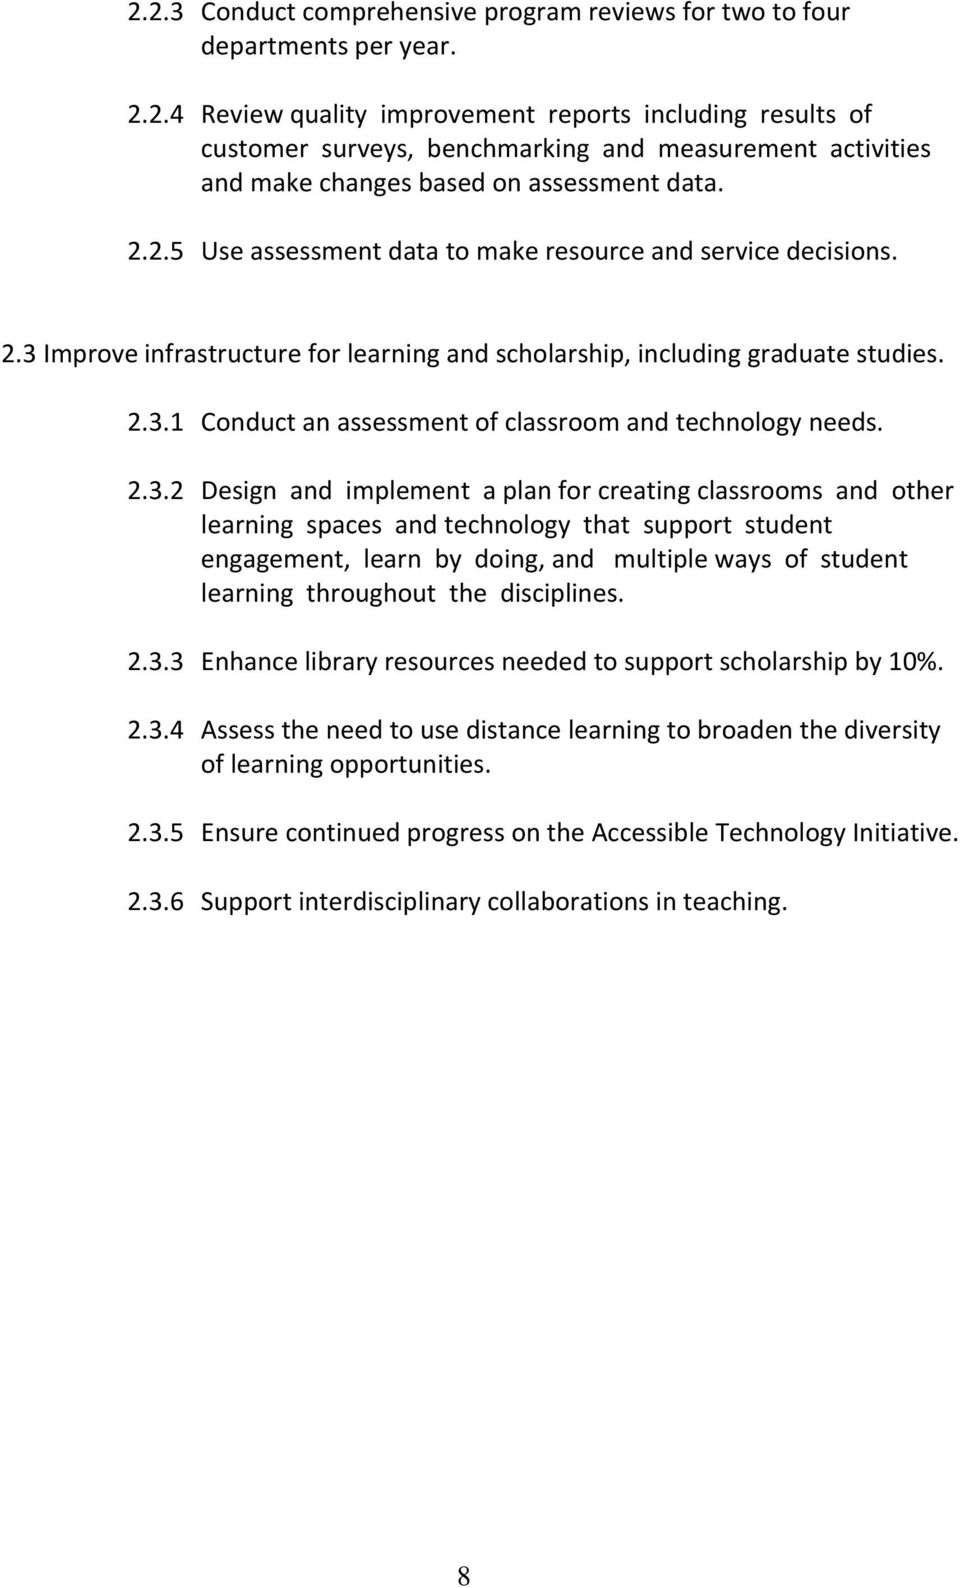 2.3.2 Design and implement a plan for creating classrooms and other learning spaces and technology that support student engagement, learn by doing, and multiple ways of student learning throughout